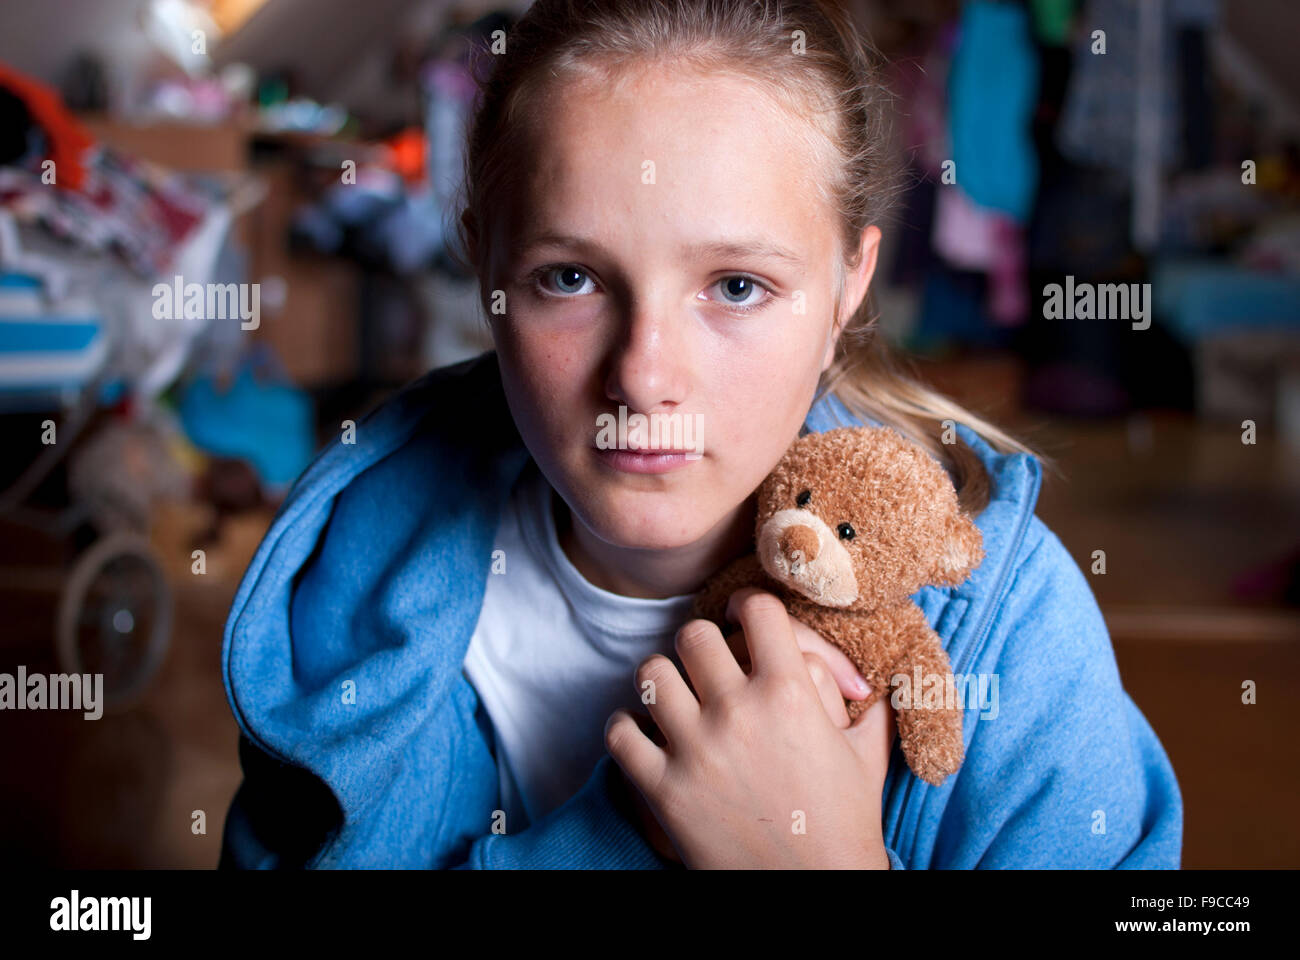 Sad teenager is scared and abused. Stock Photo